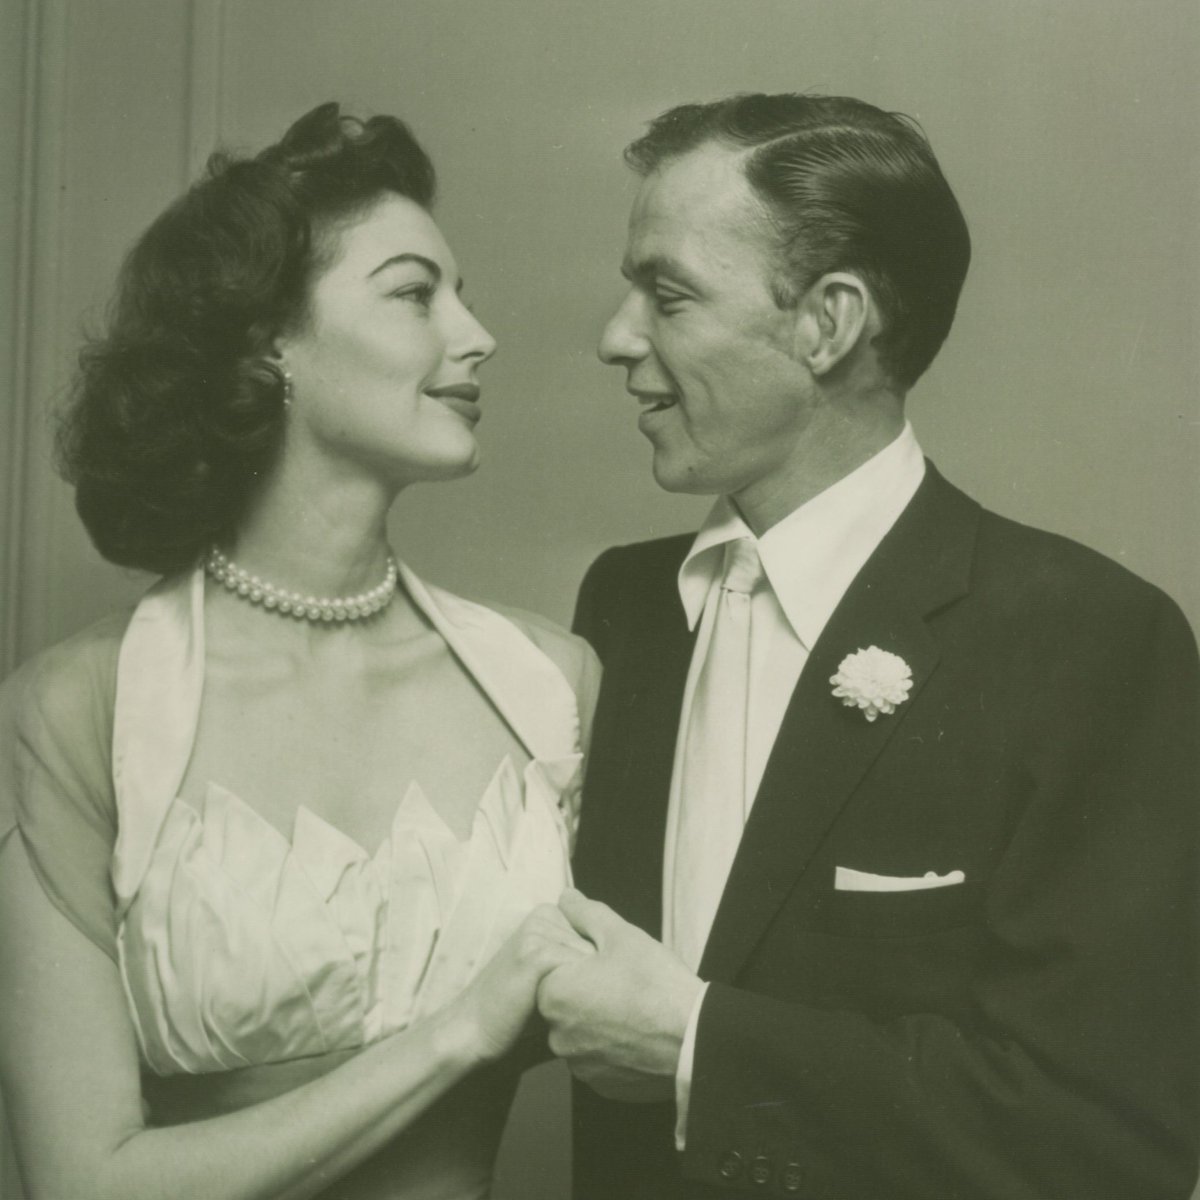 You may notice a sweet, familiar voice following you in the galleries… music from Frank’s personal acetates playing in the galleries, now! #AvaGardner #FrankSinatra #MGM100 #VisitJoCo #TCMParty